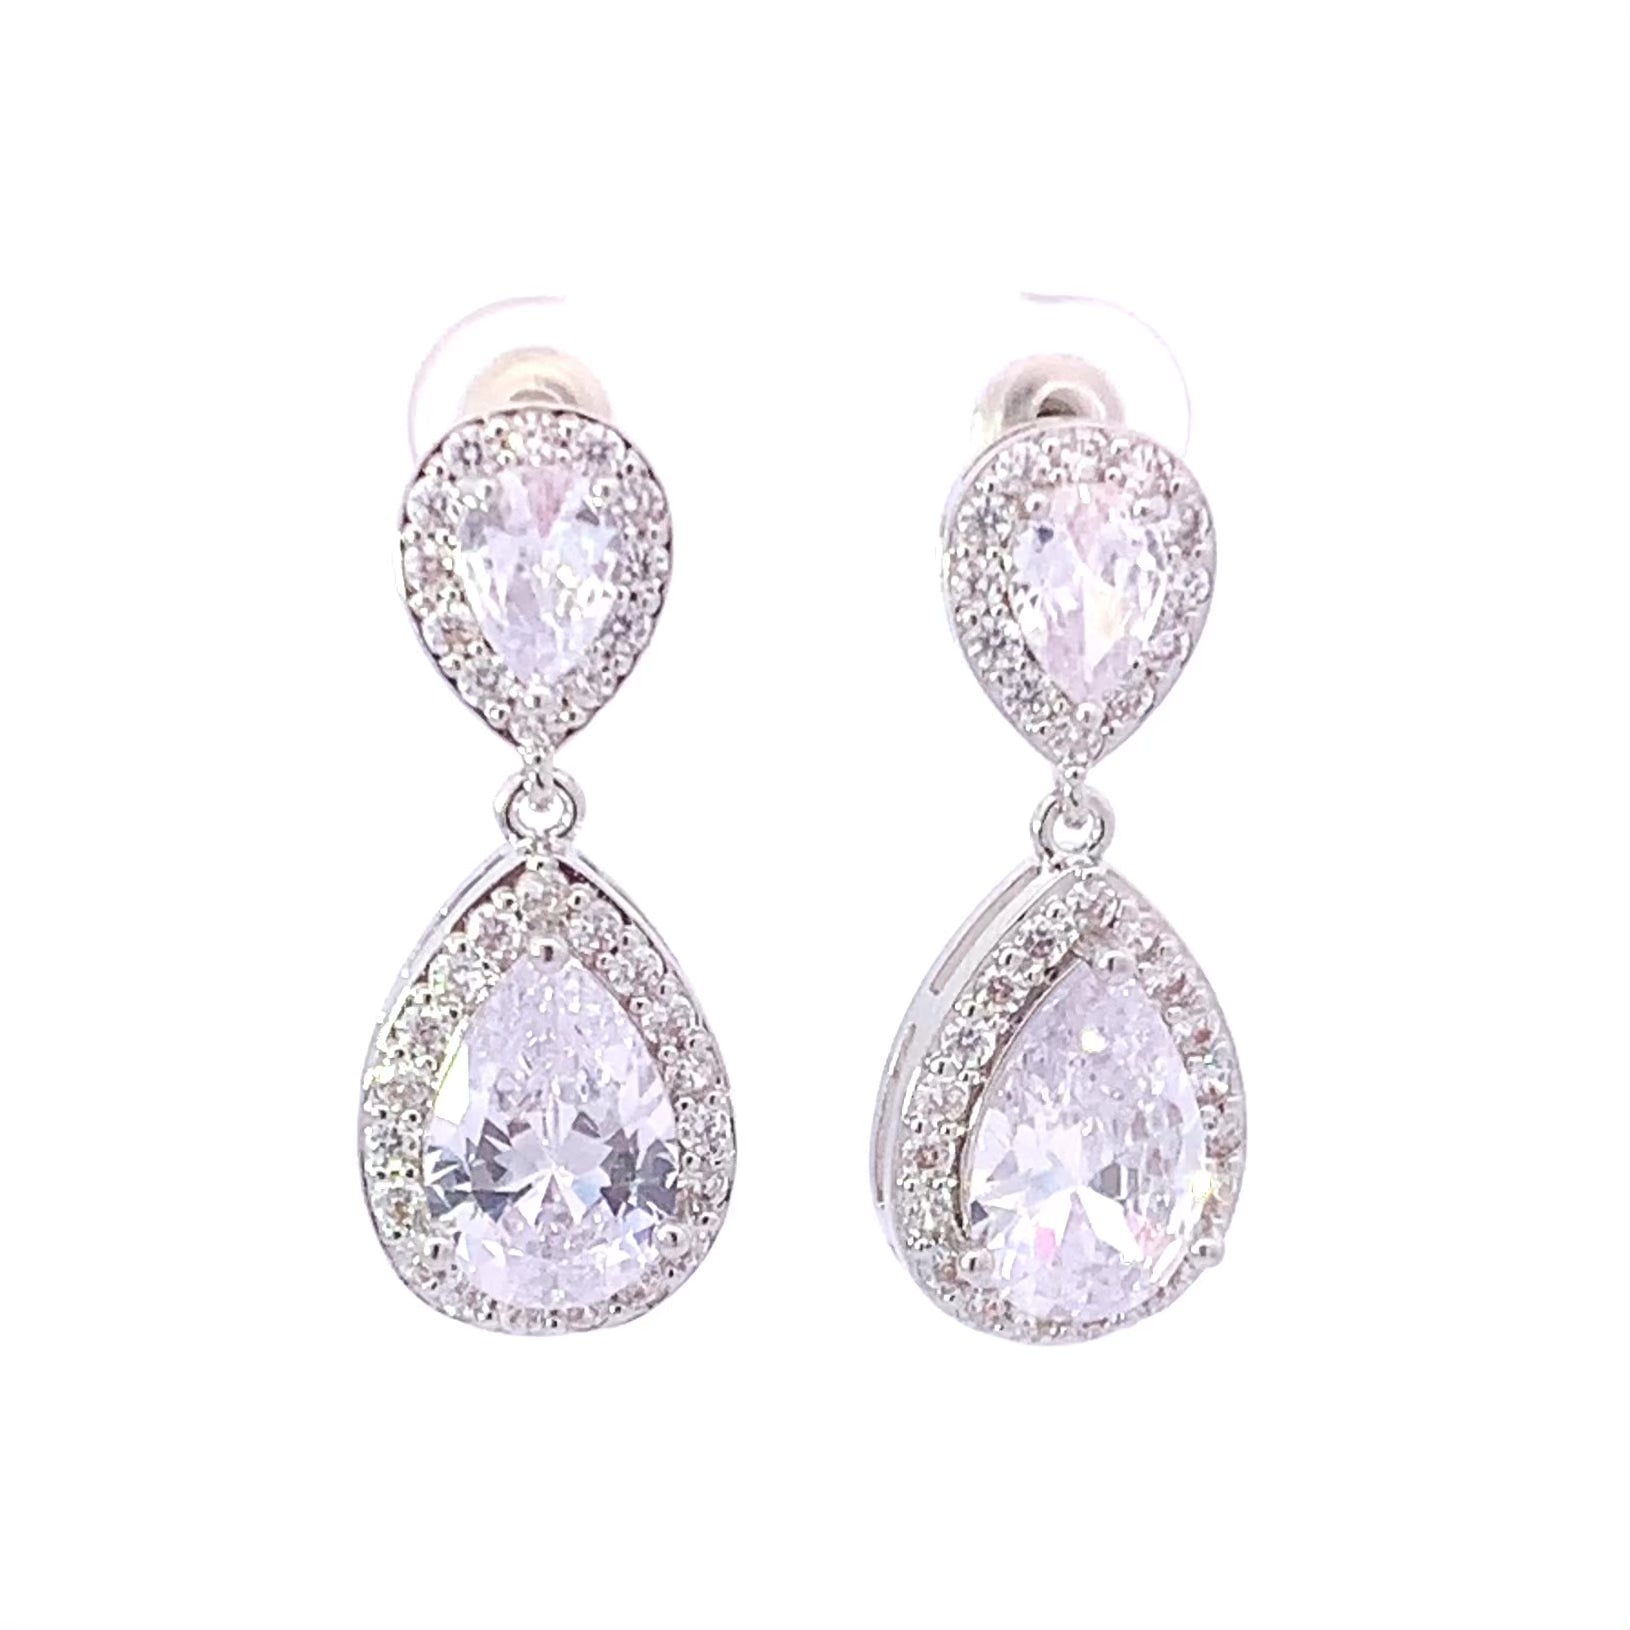 Bridal earrings in a pear shape with a crystal halo